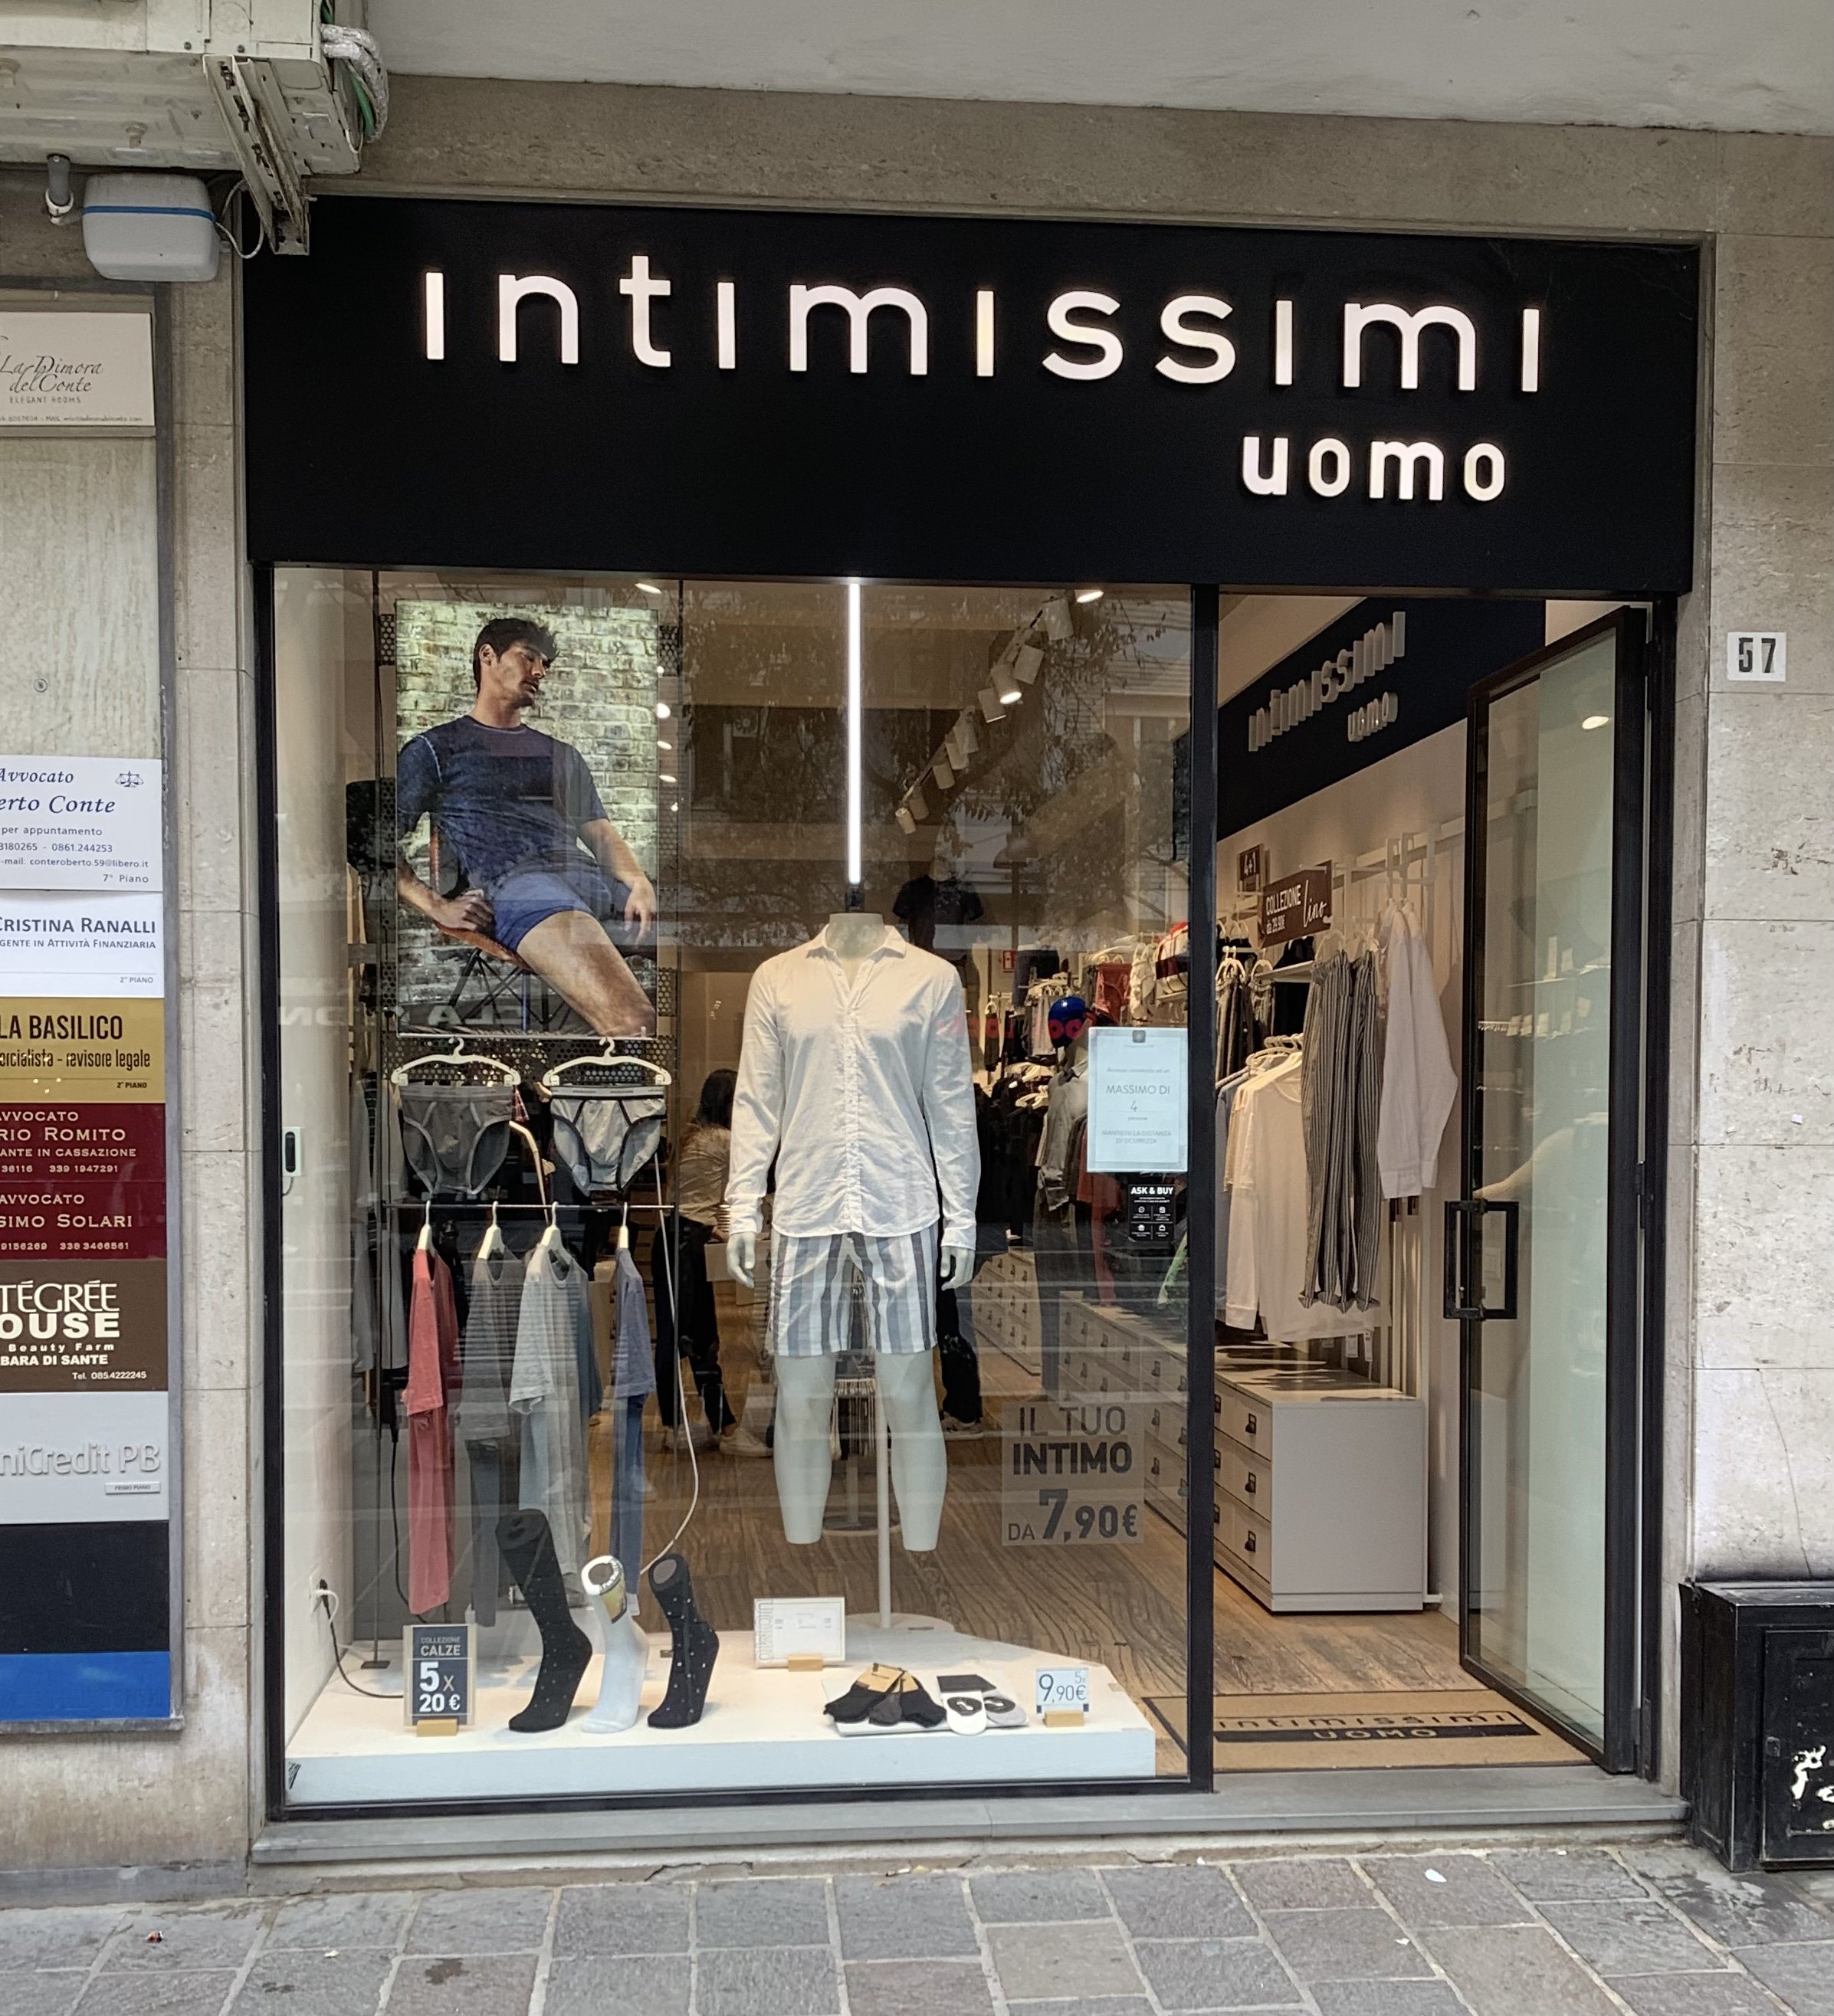 https://www.intimissimi.com/on/demandware.static/-/Library-Sites-IntimissimiContentLibrary/default/dw92d41a54/storeImages/IUO_IS27_001.jpg